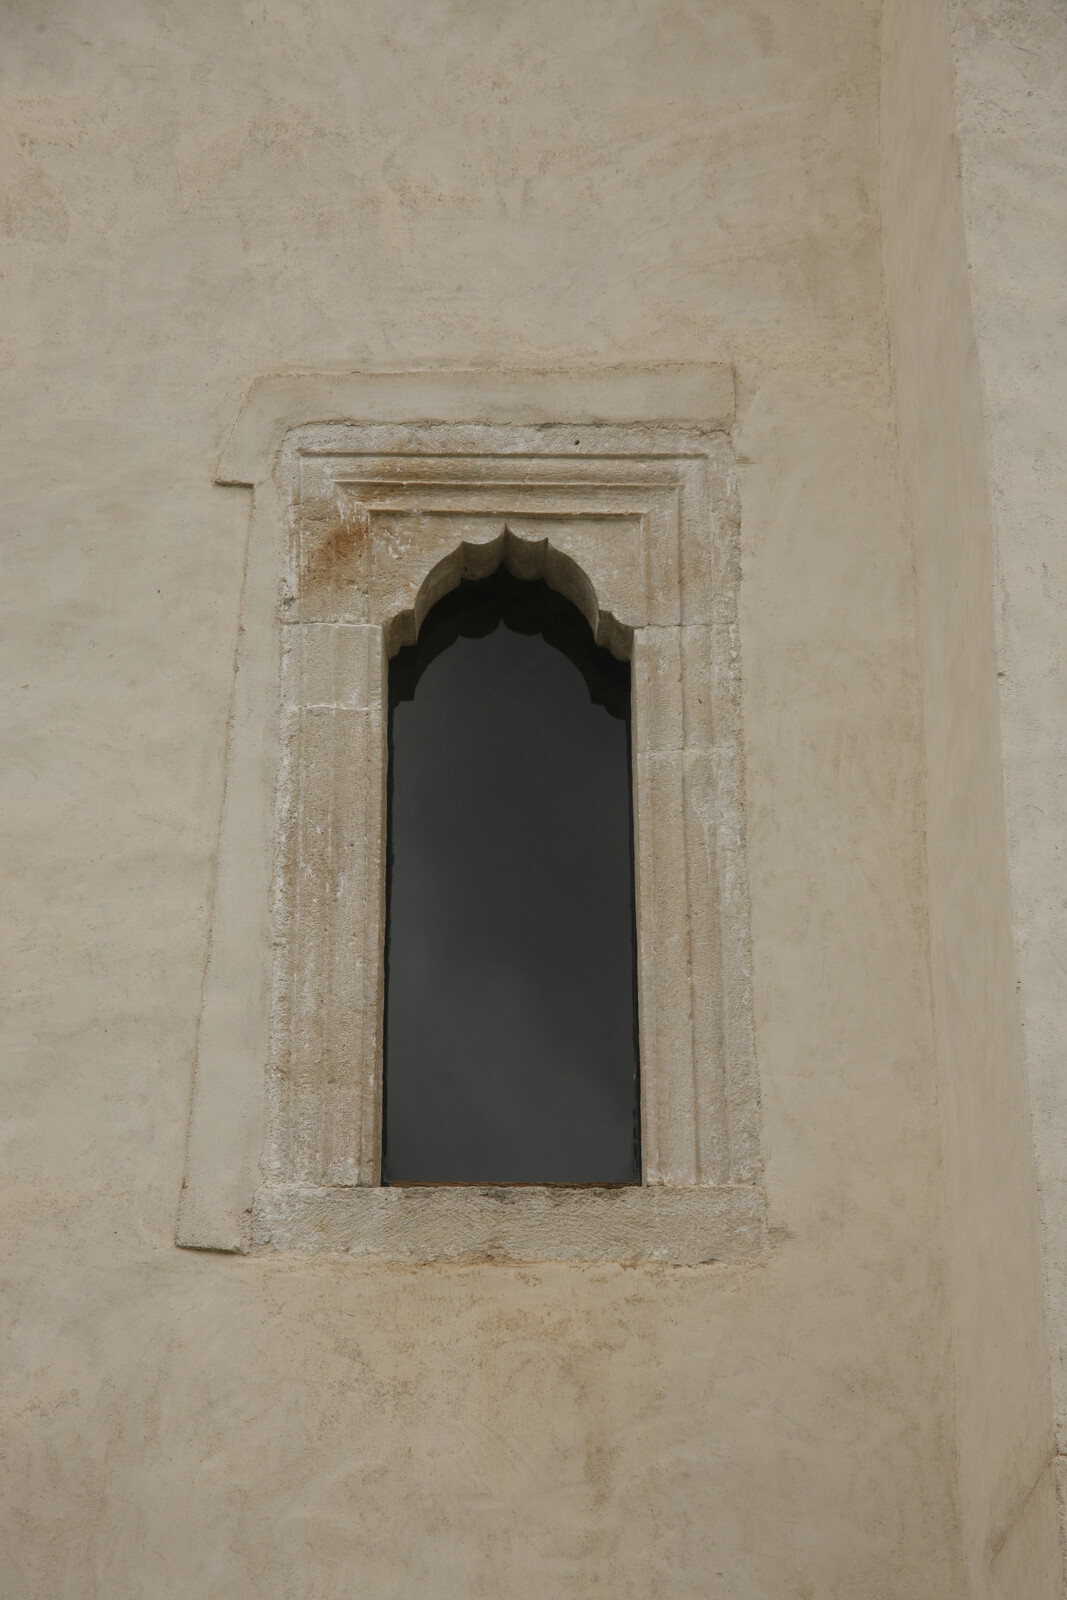 Window on the southern wall of the narthex